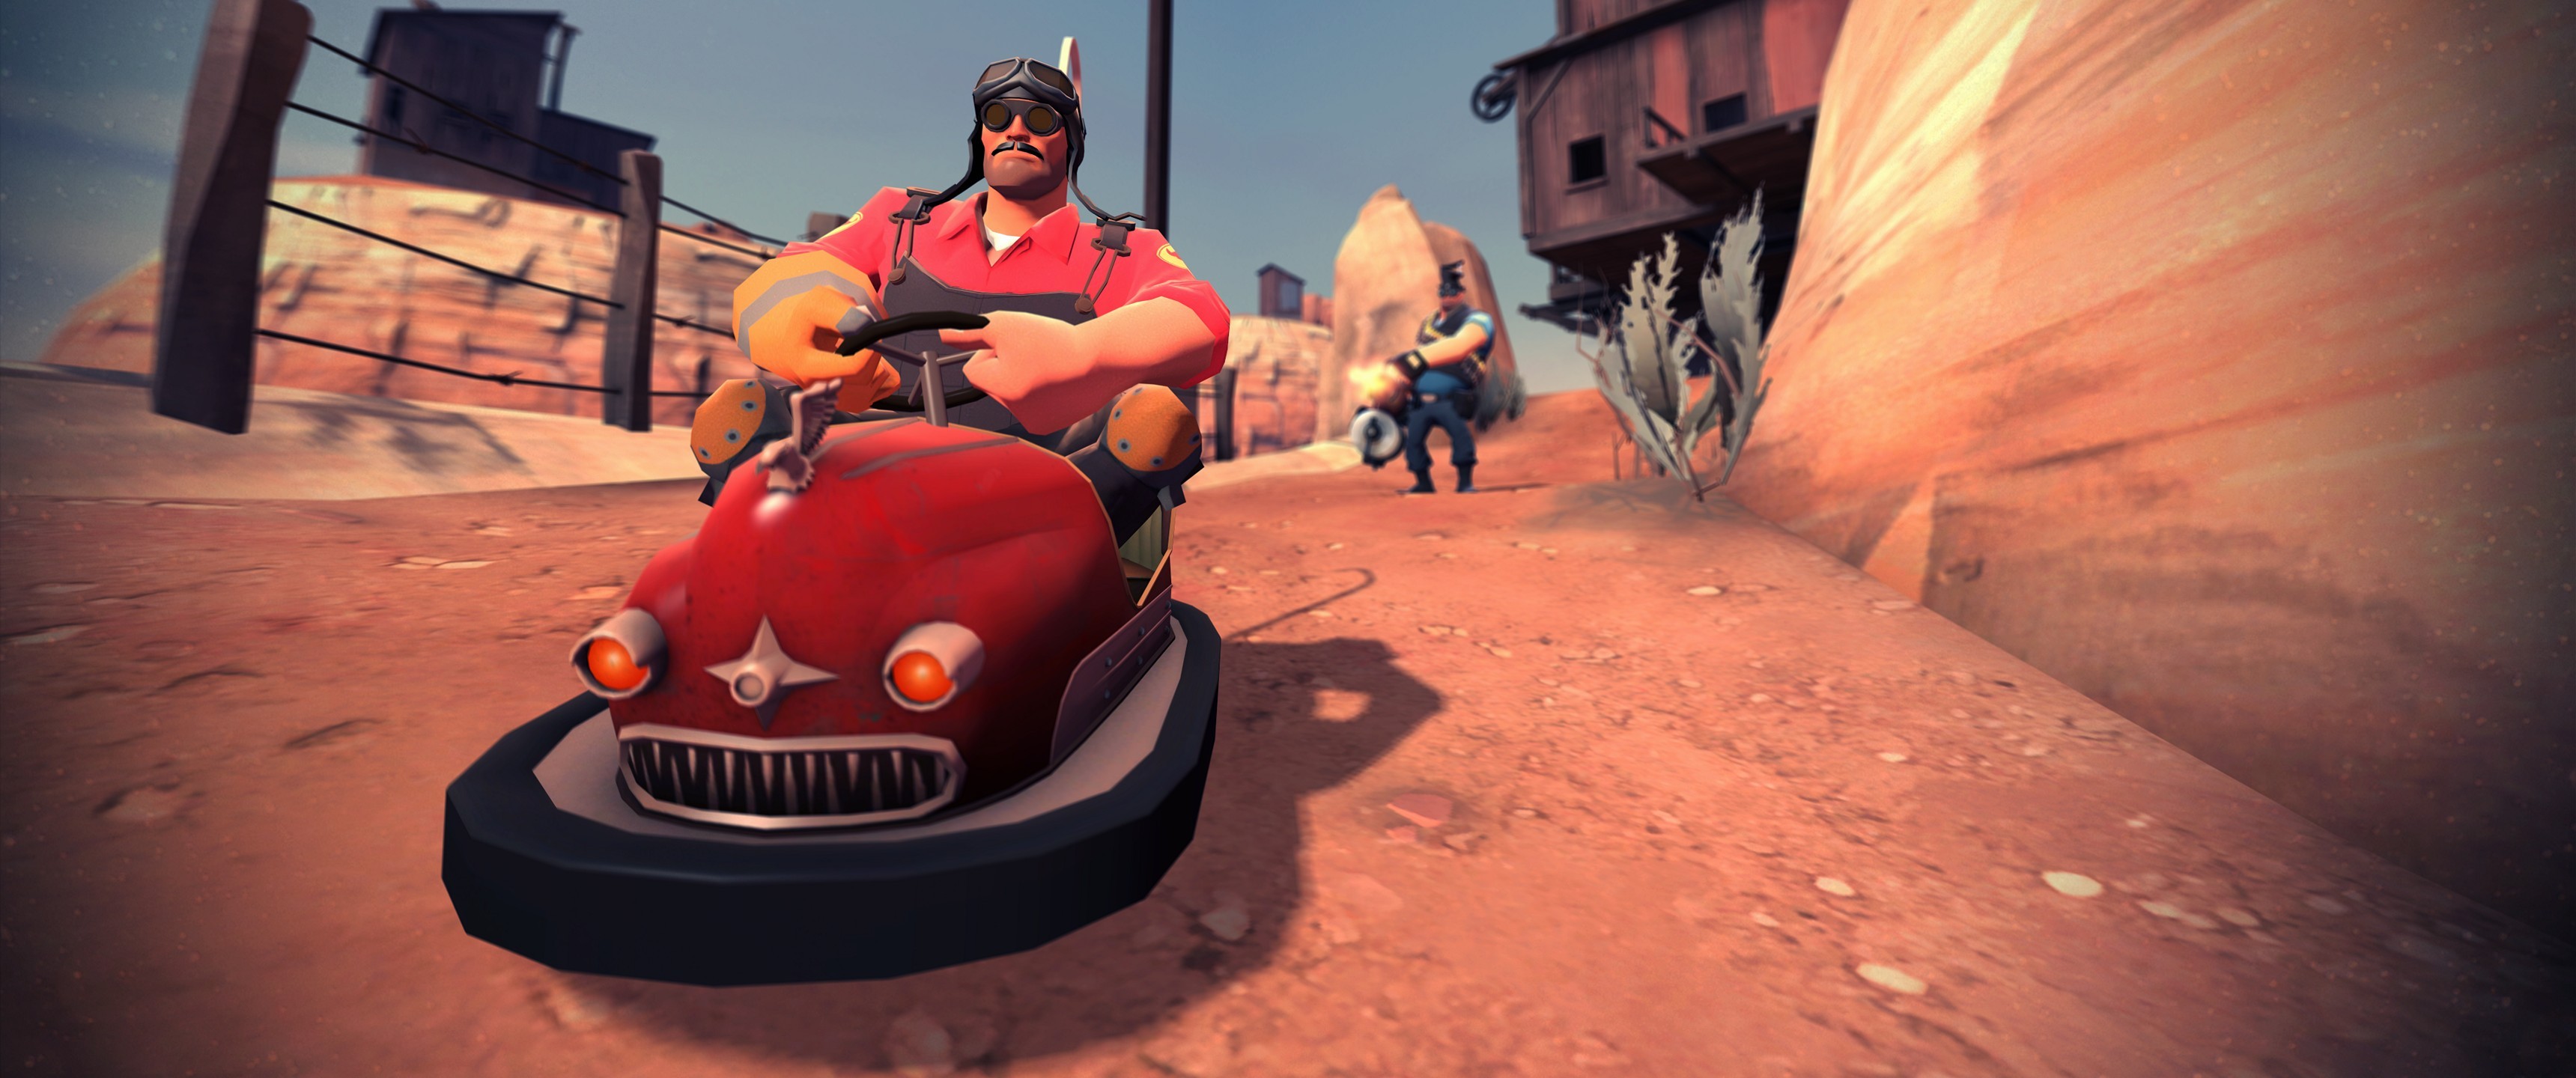 General 3440x1440 Team Fortress 2 video games Engineer (TF2) Heavy (TF2) scooters PC gaming